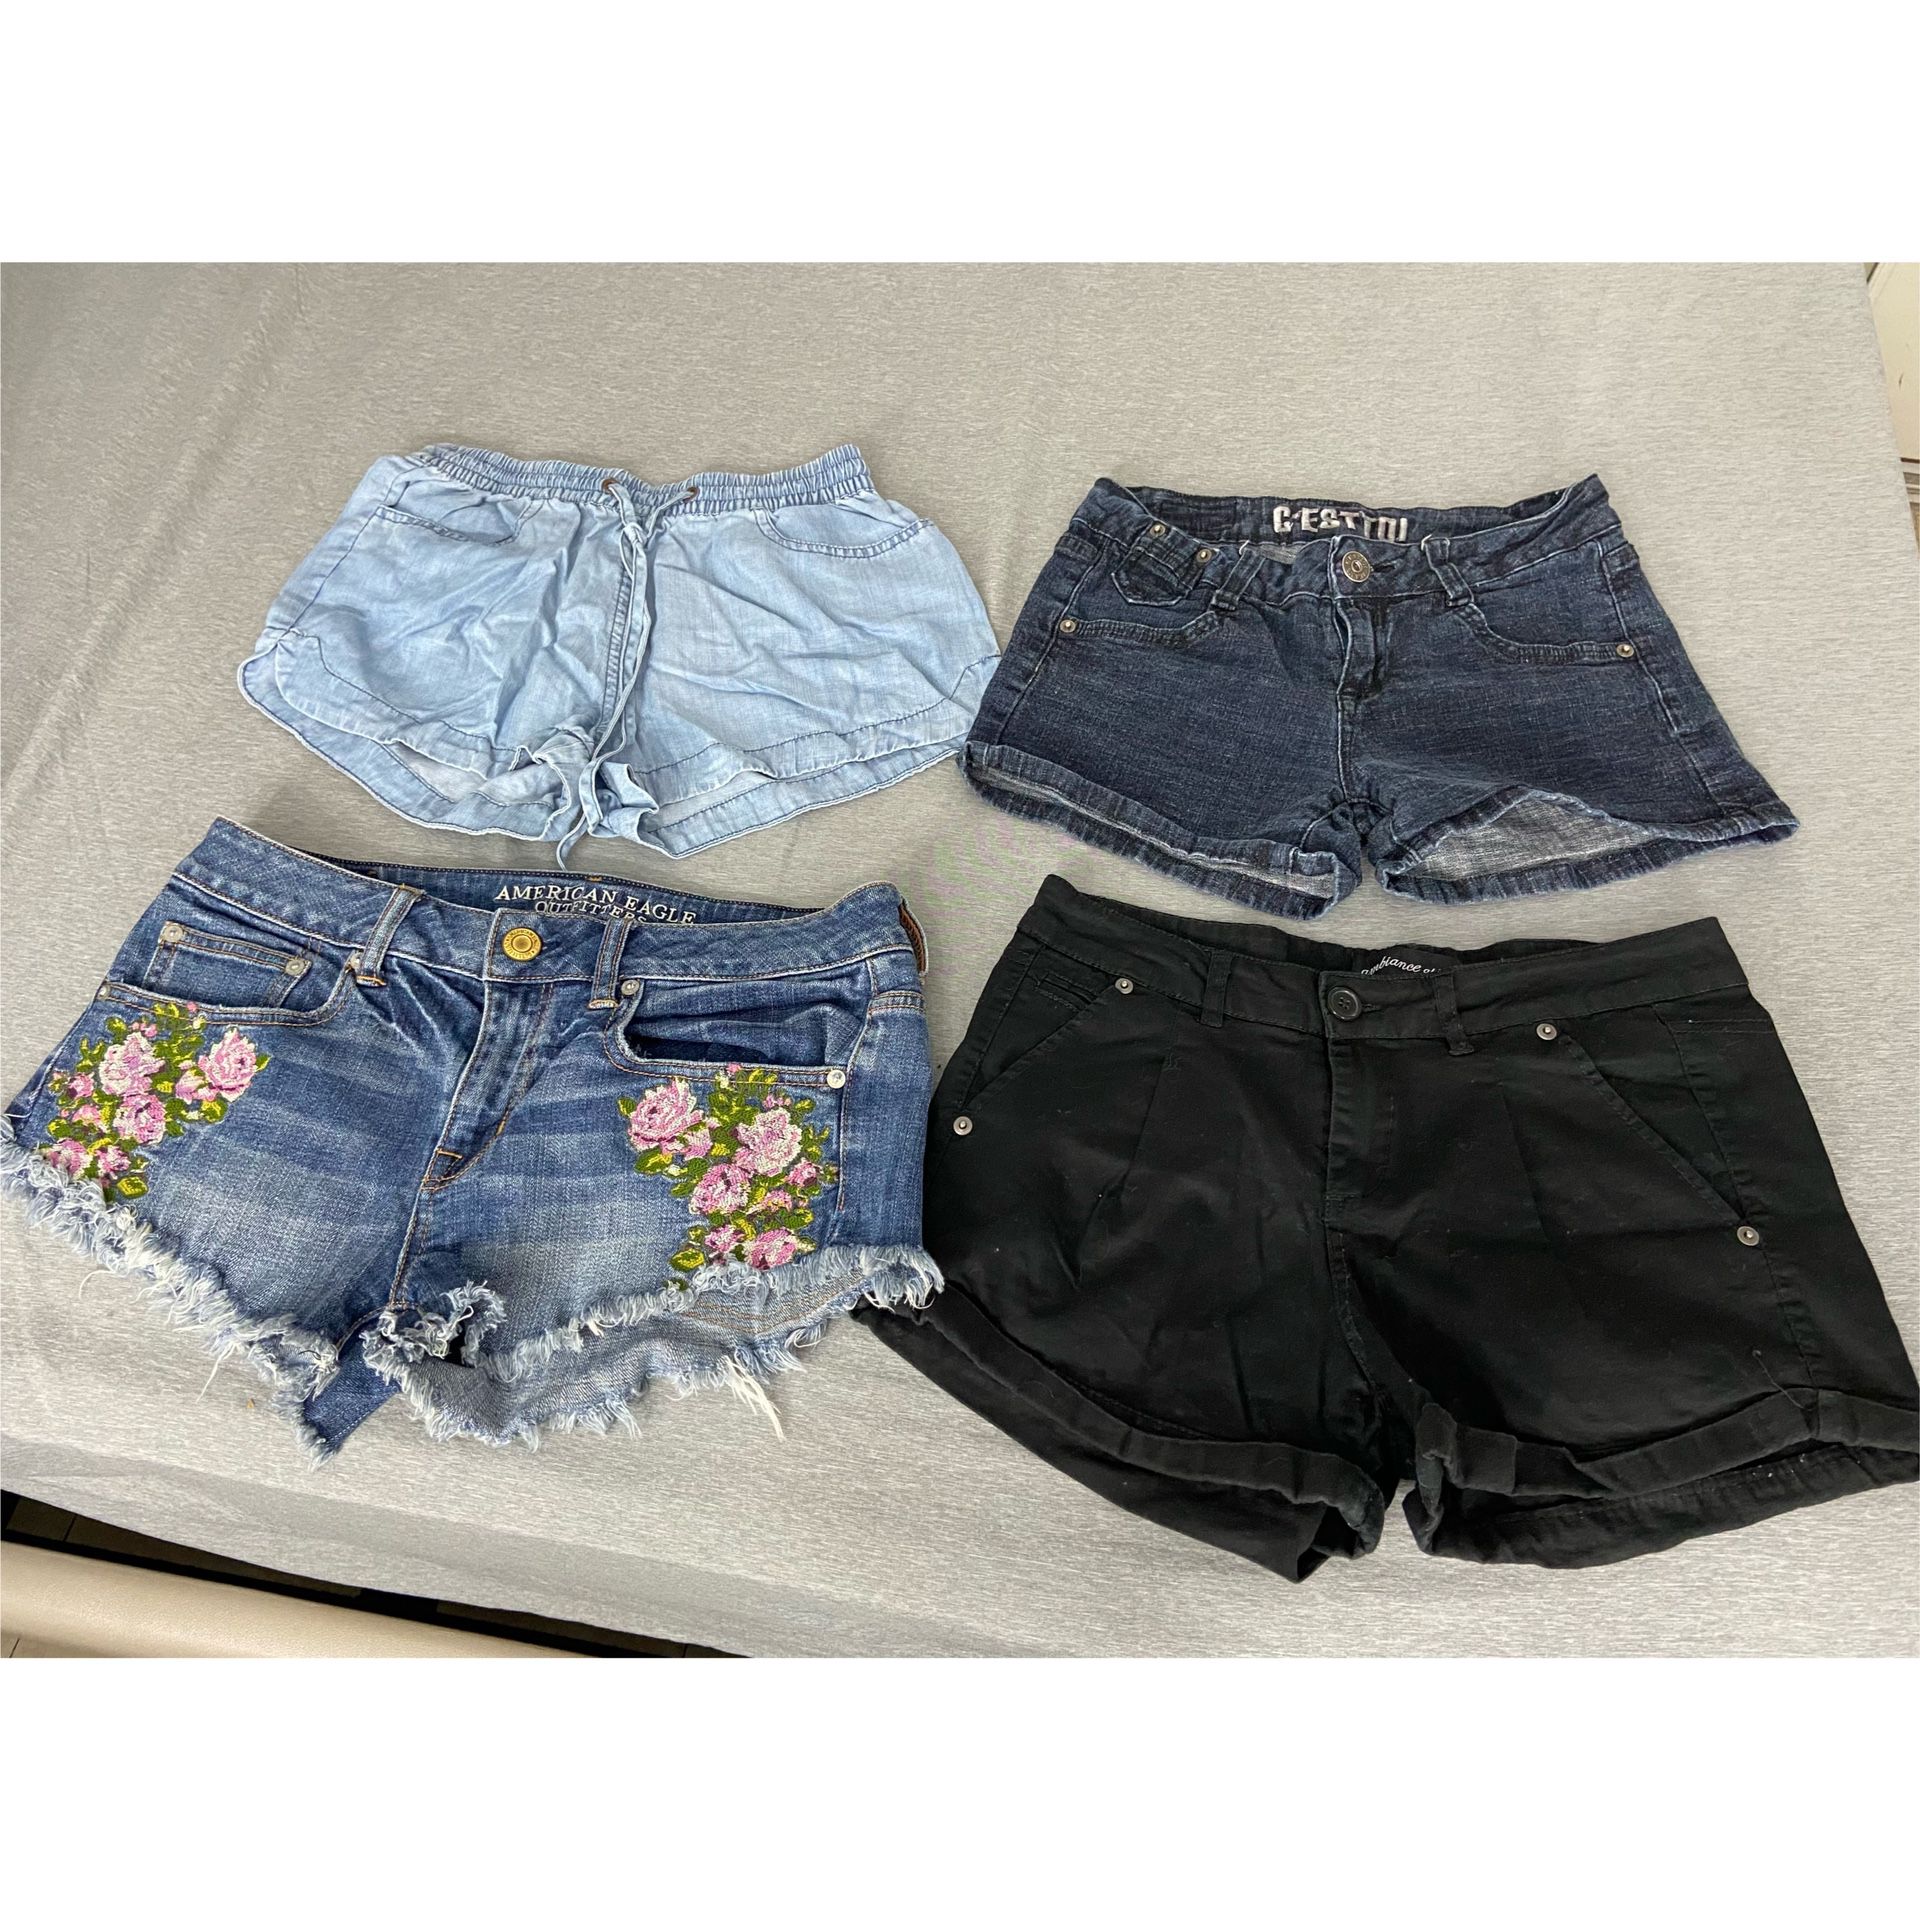 American Eagle & Other Brands $25 For All Shorts 